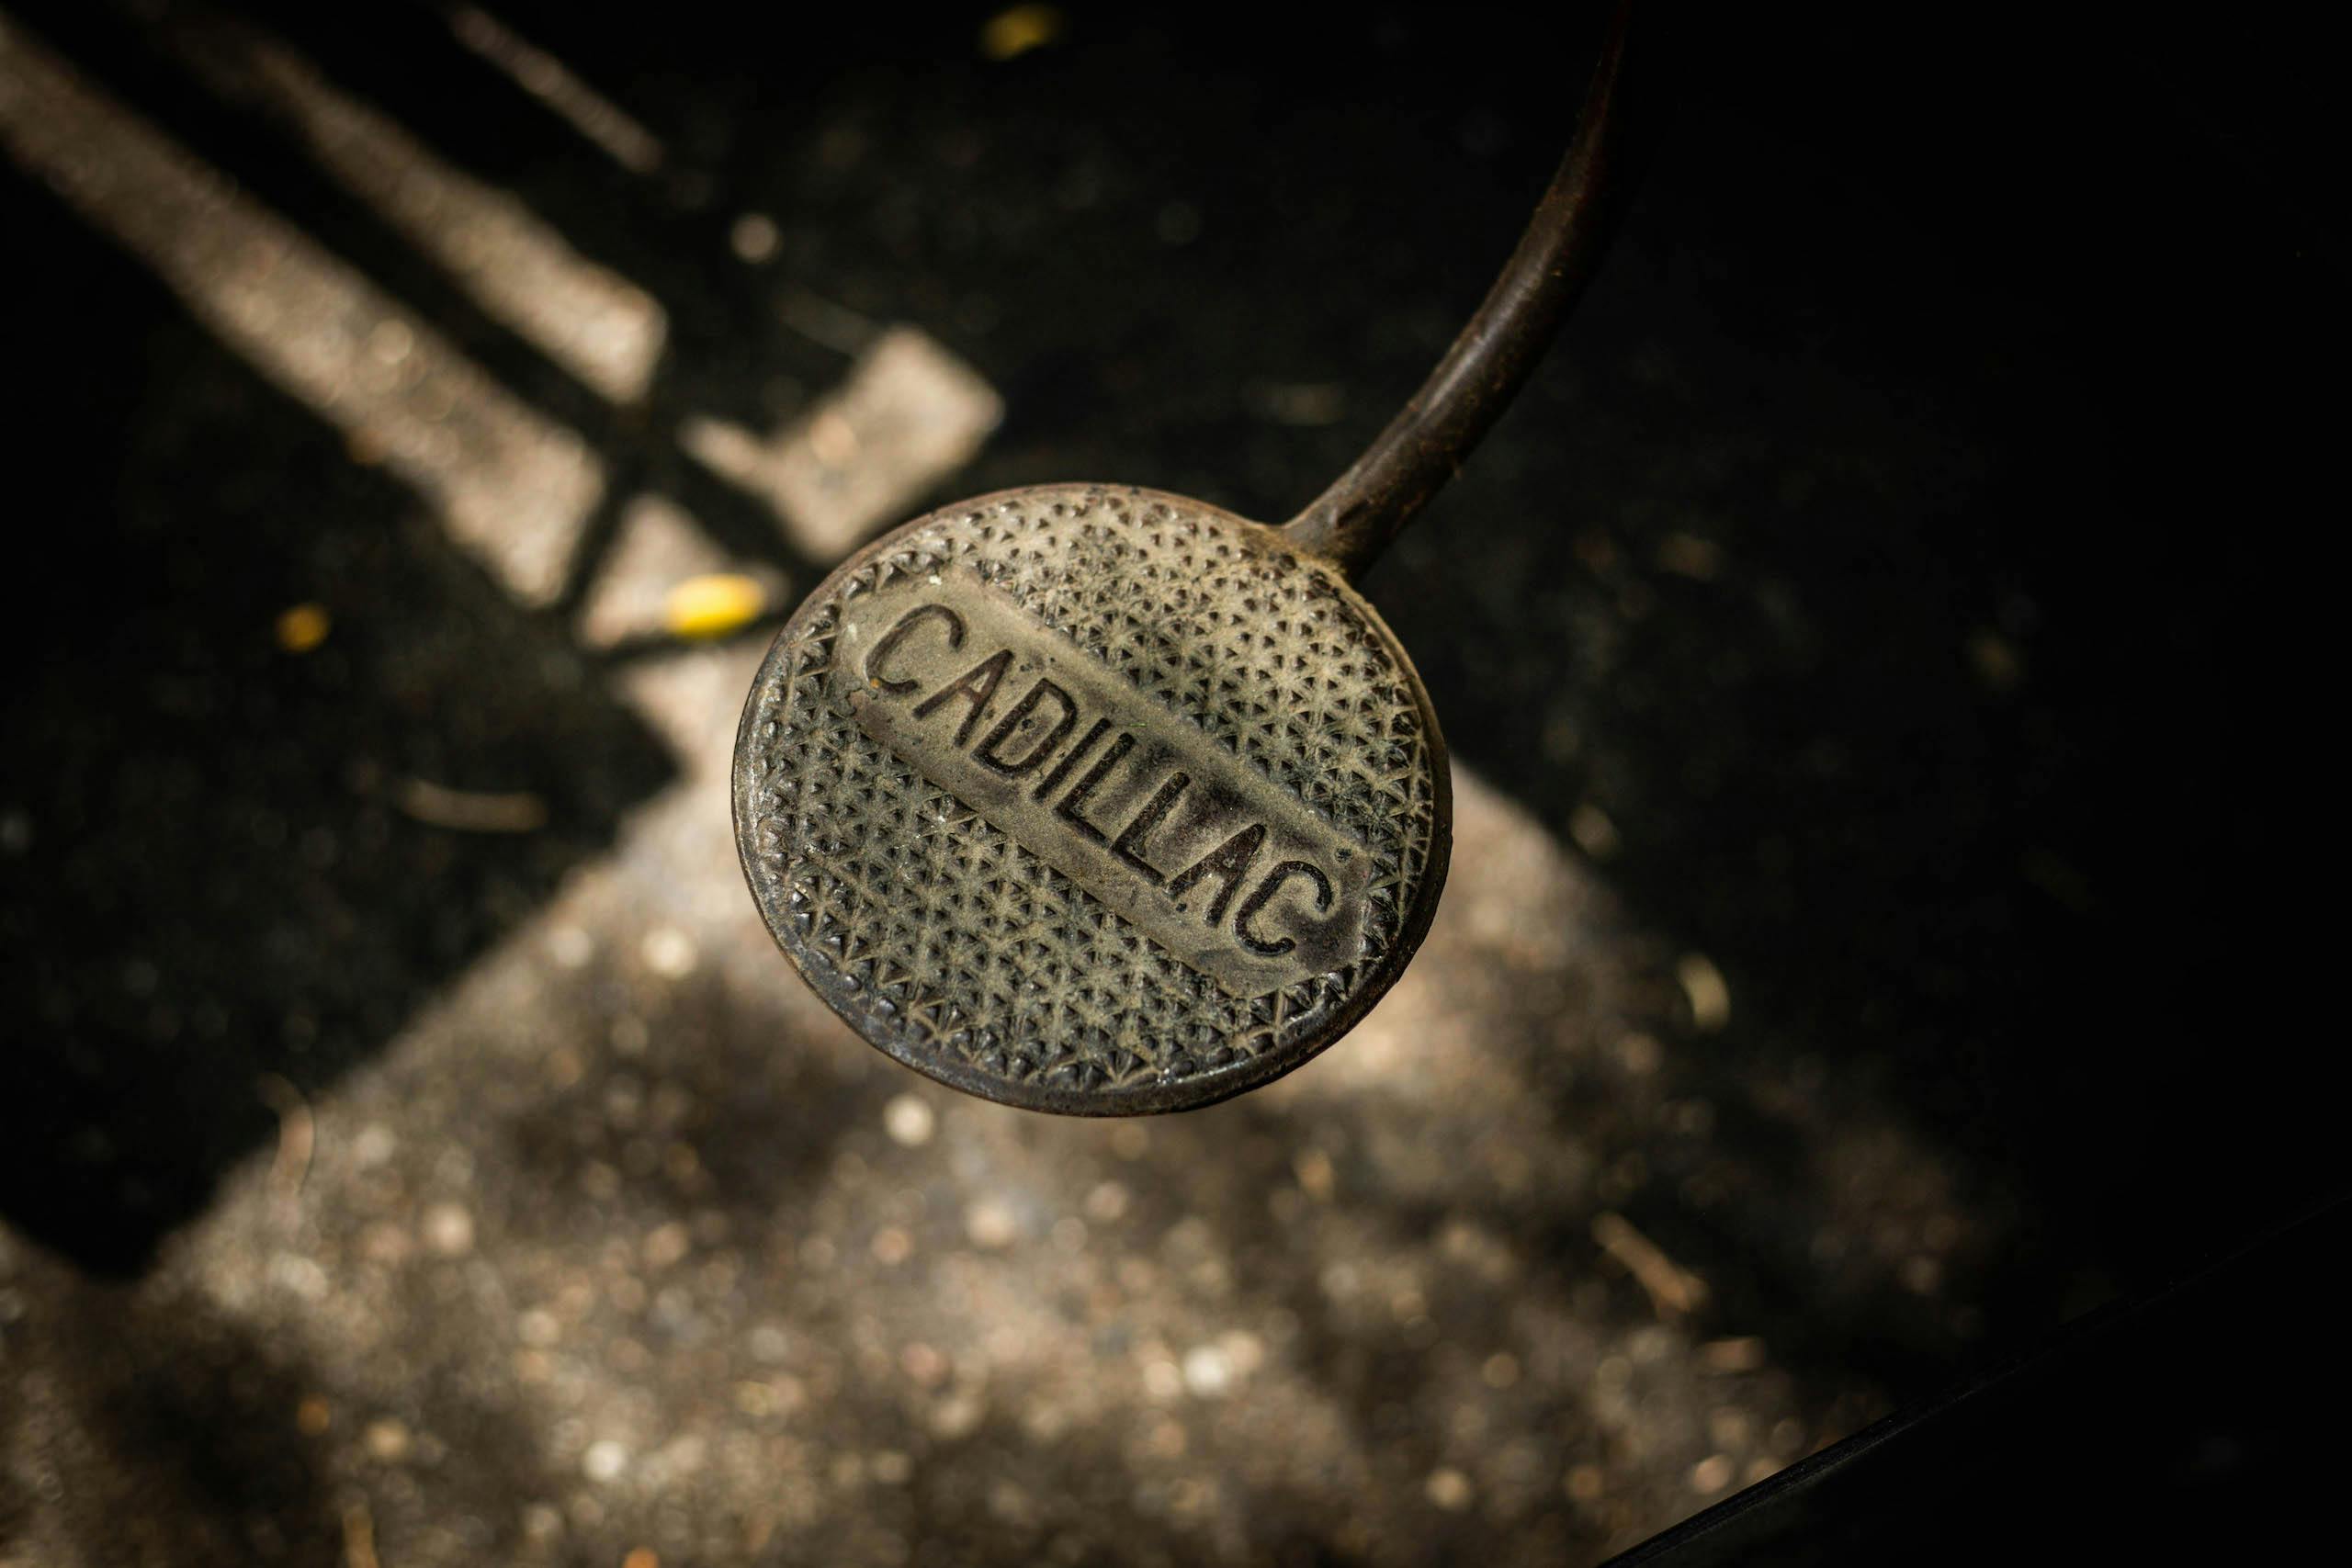 1906 Cadillac runabout foot pedal detail